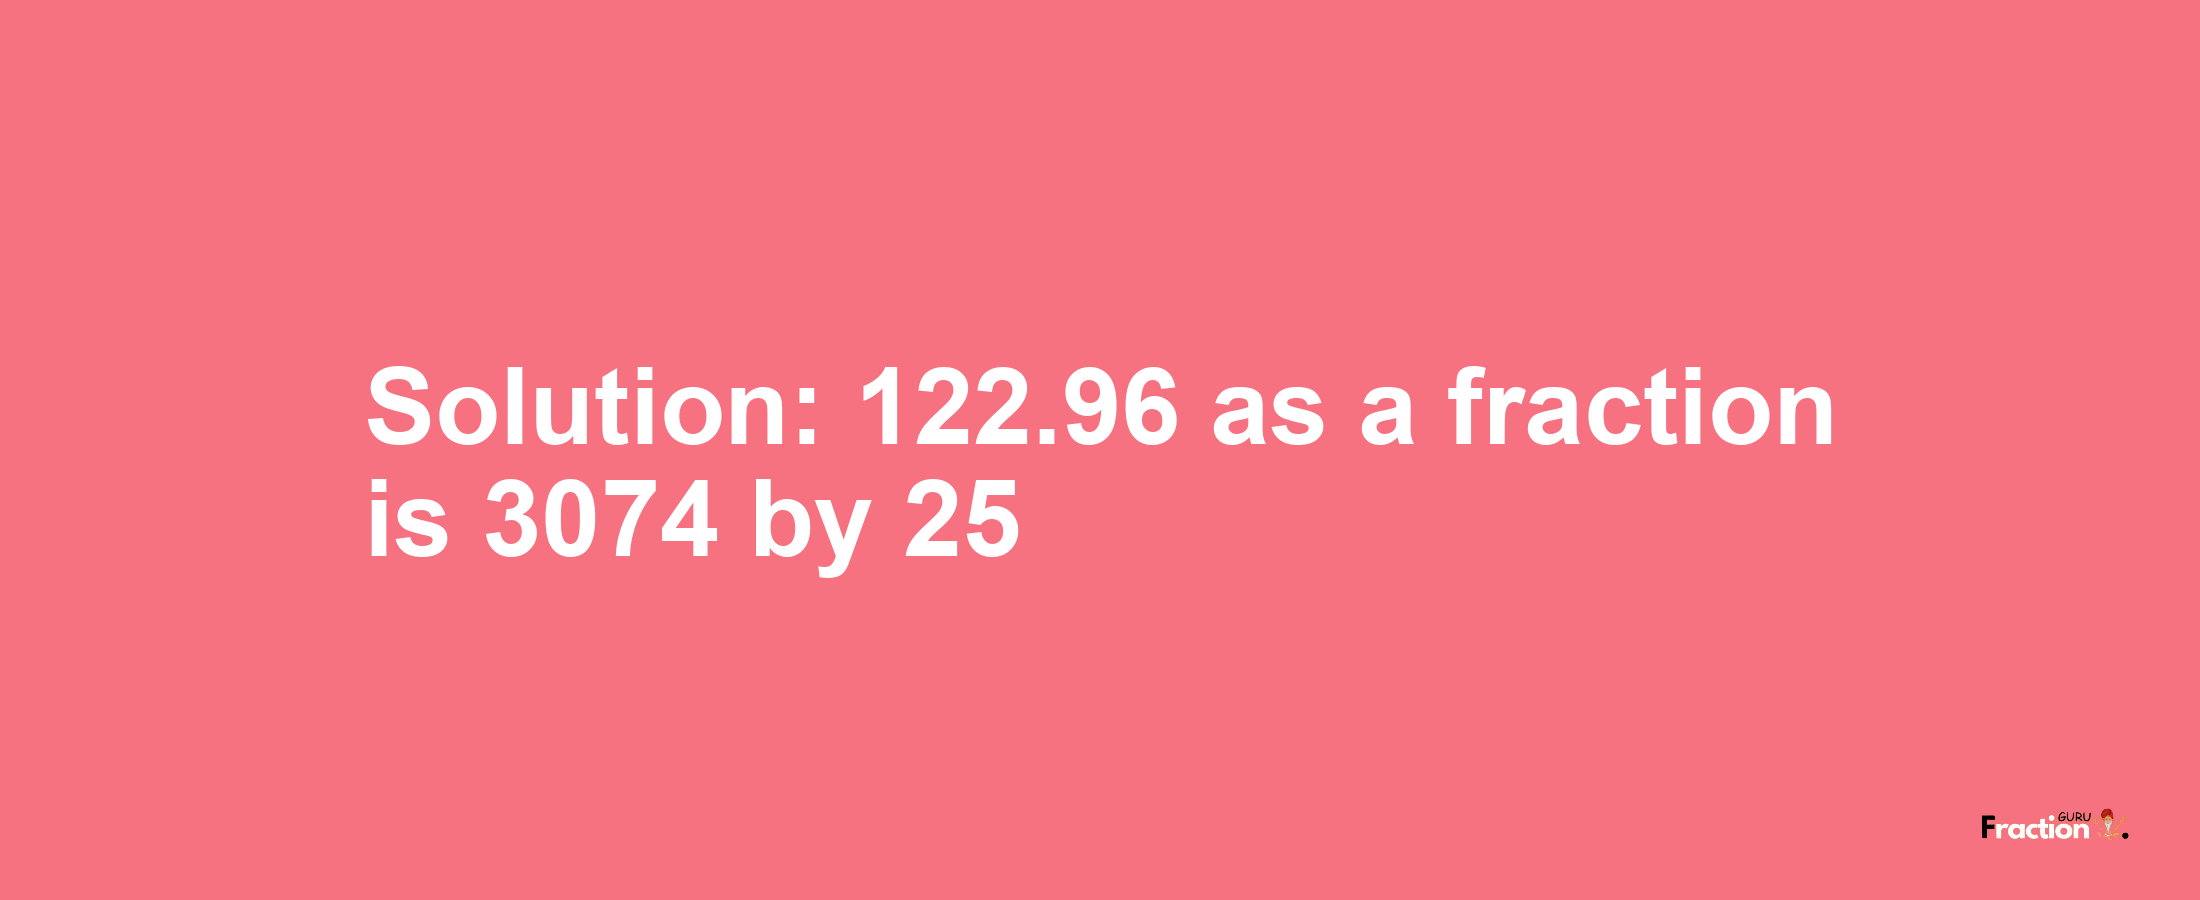 Solution:122.96 as a fraction is 3074/25